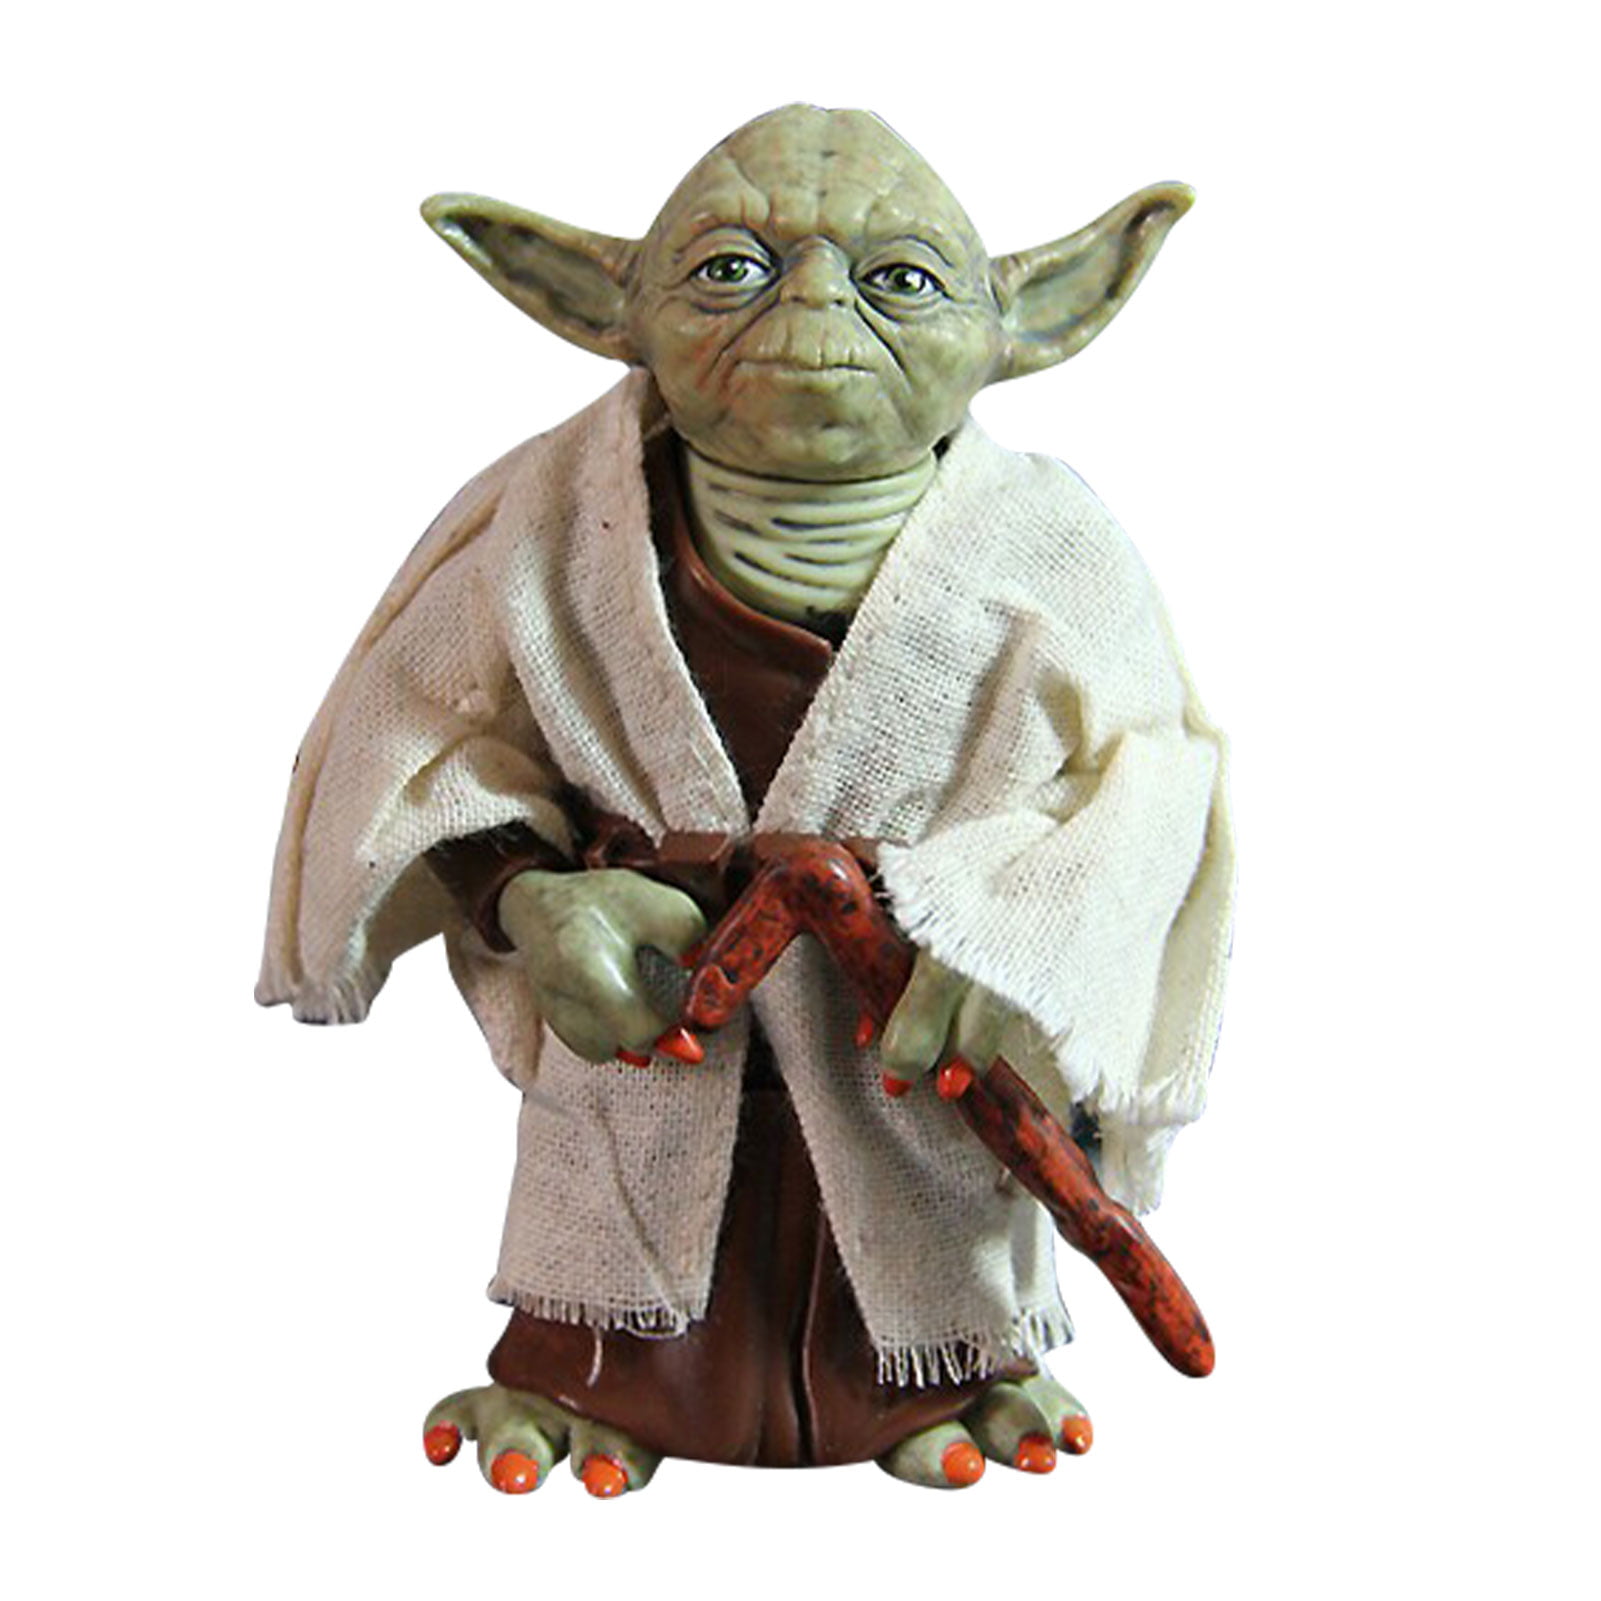 1pcs Action Figure Master Yoda Star Wars Jedi Knight Collectible Model Toy 12 cm 